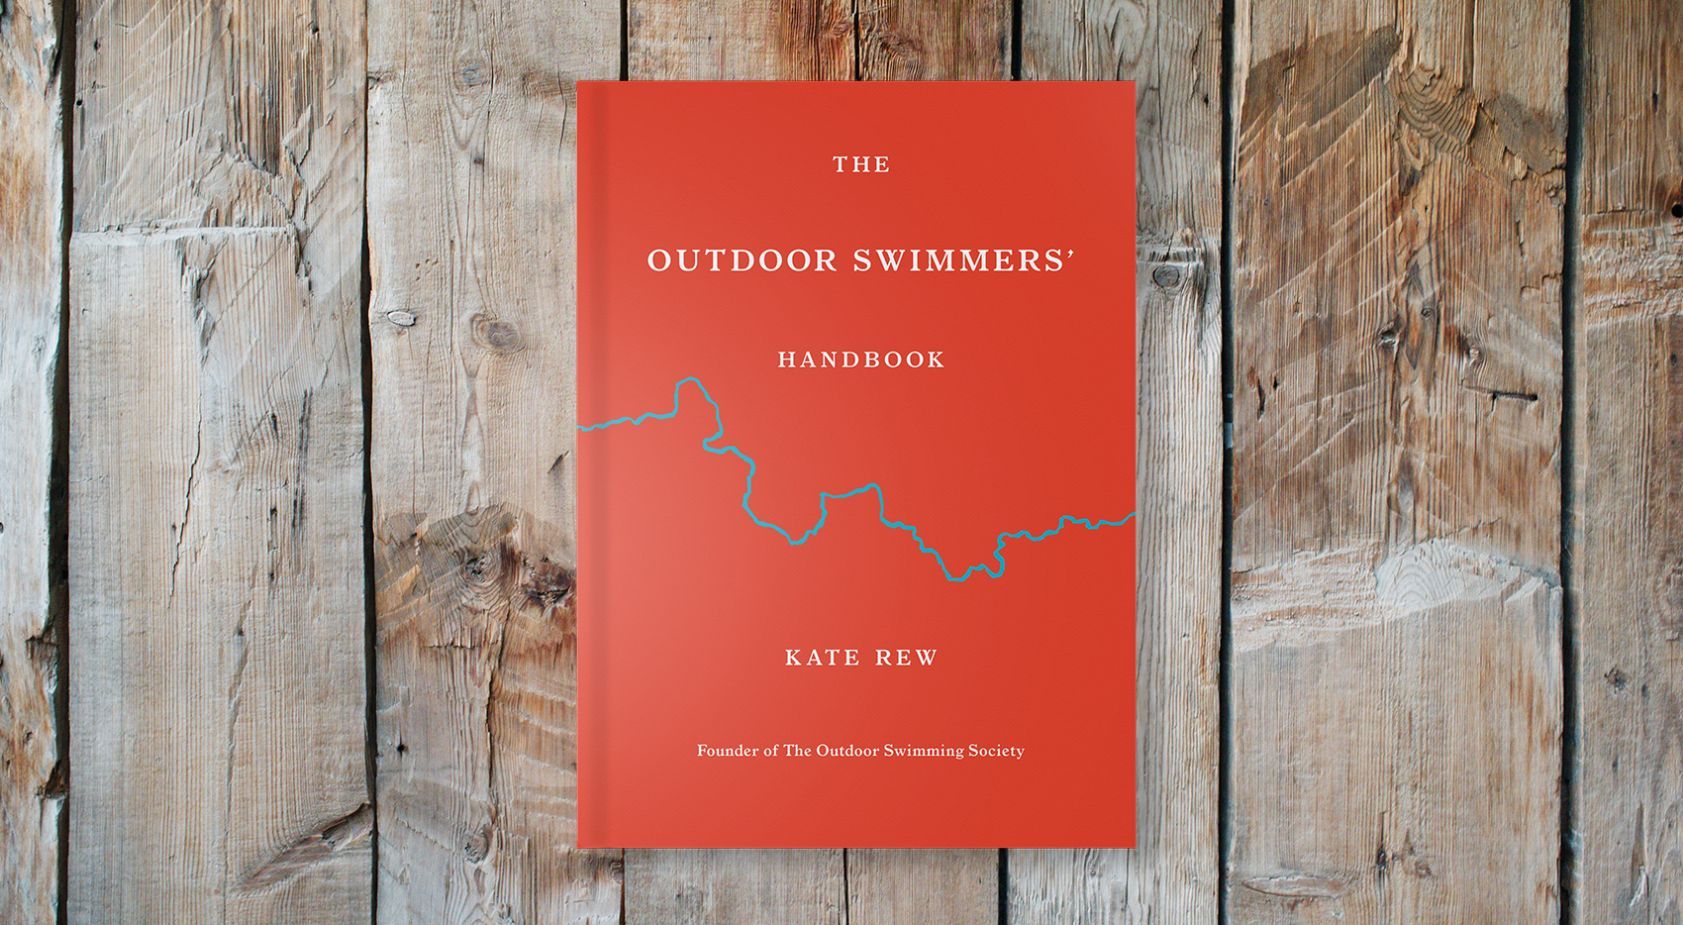 A book portrait of The Outdoor Swimmers' Handbook, by Kate Rew